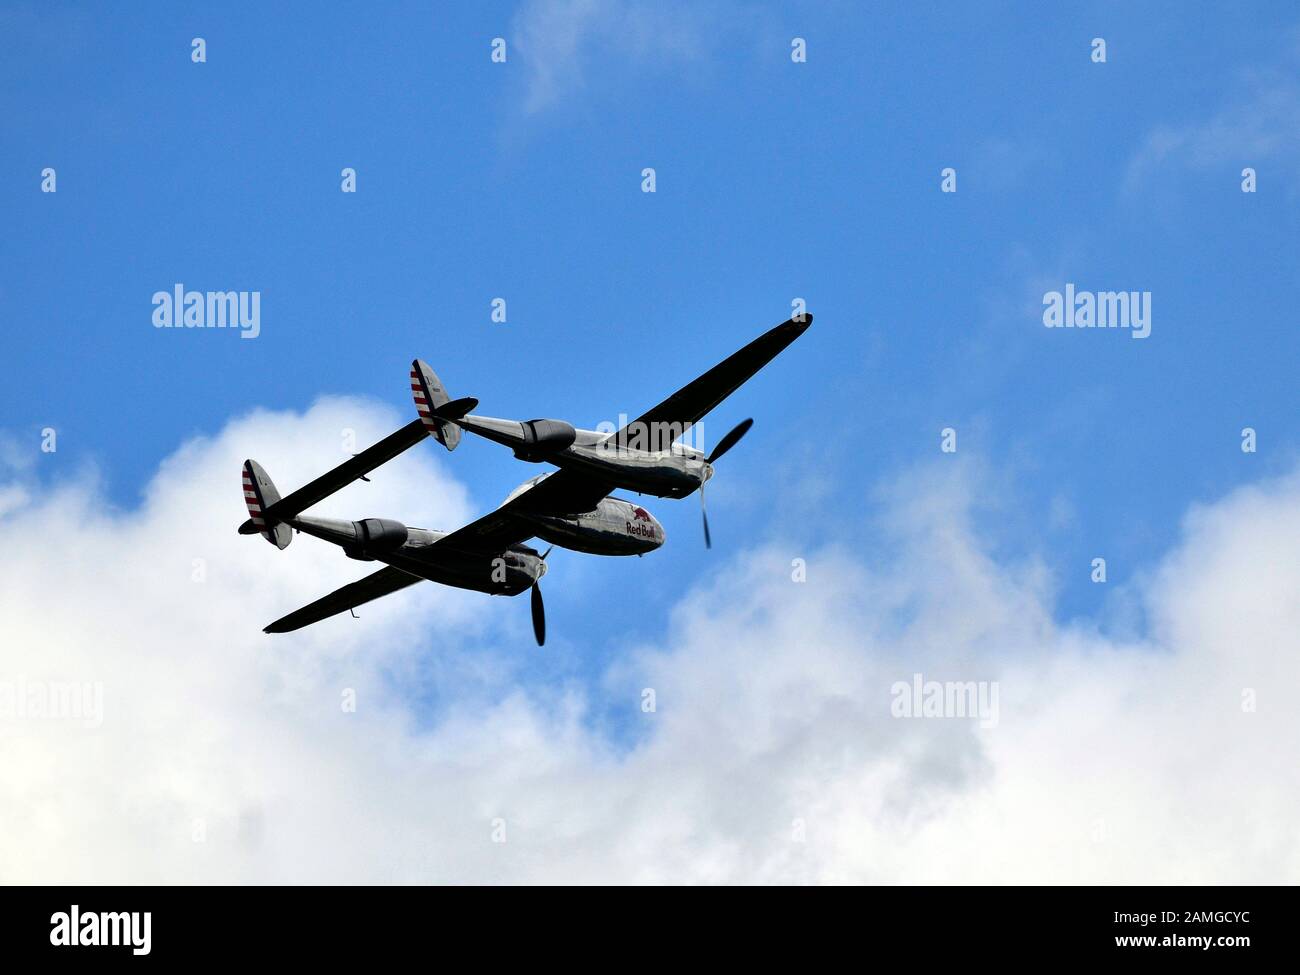 ZELTWEG, AUSTRIA - JULY 0Zeltweg, Austria - July 01, 2011: Display with vintage WWII fighter aircraft Lightning P38  by public airshow Airpower11 Stock Photo